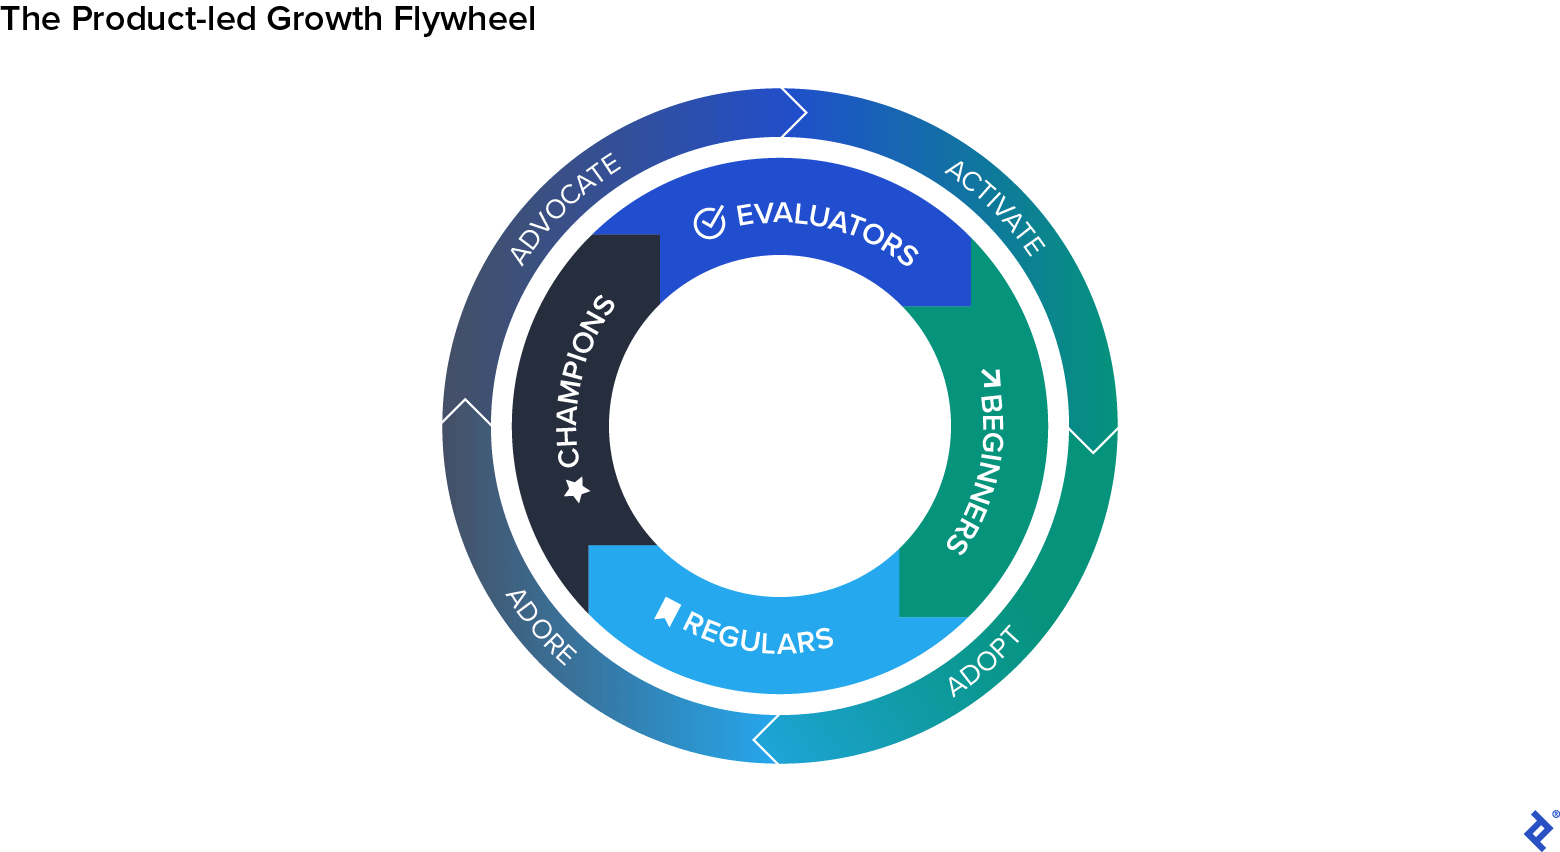 The first layer of the product-led growth flywheel starts with Activate and moves through Adopt, Adore, and Advocate.